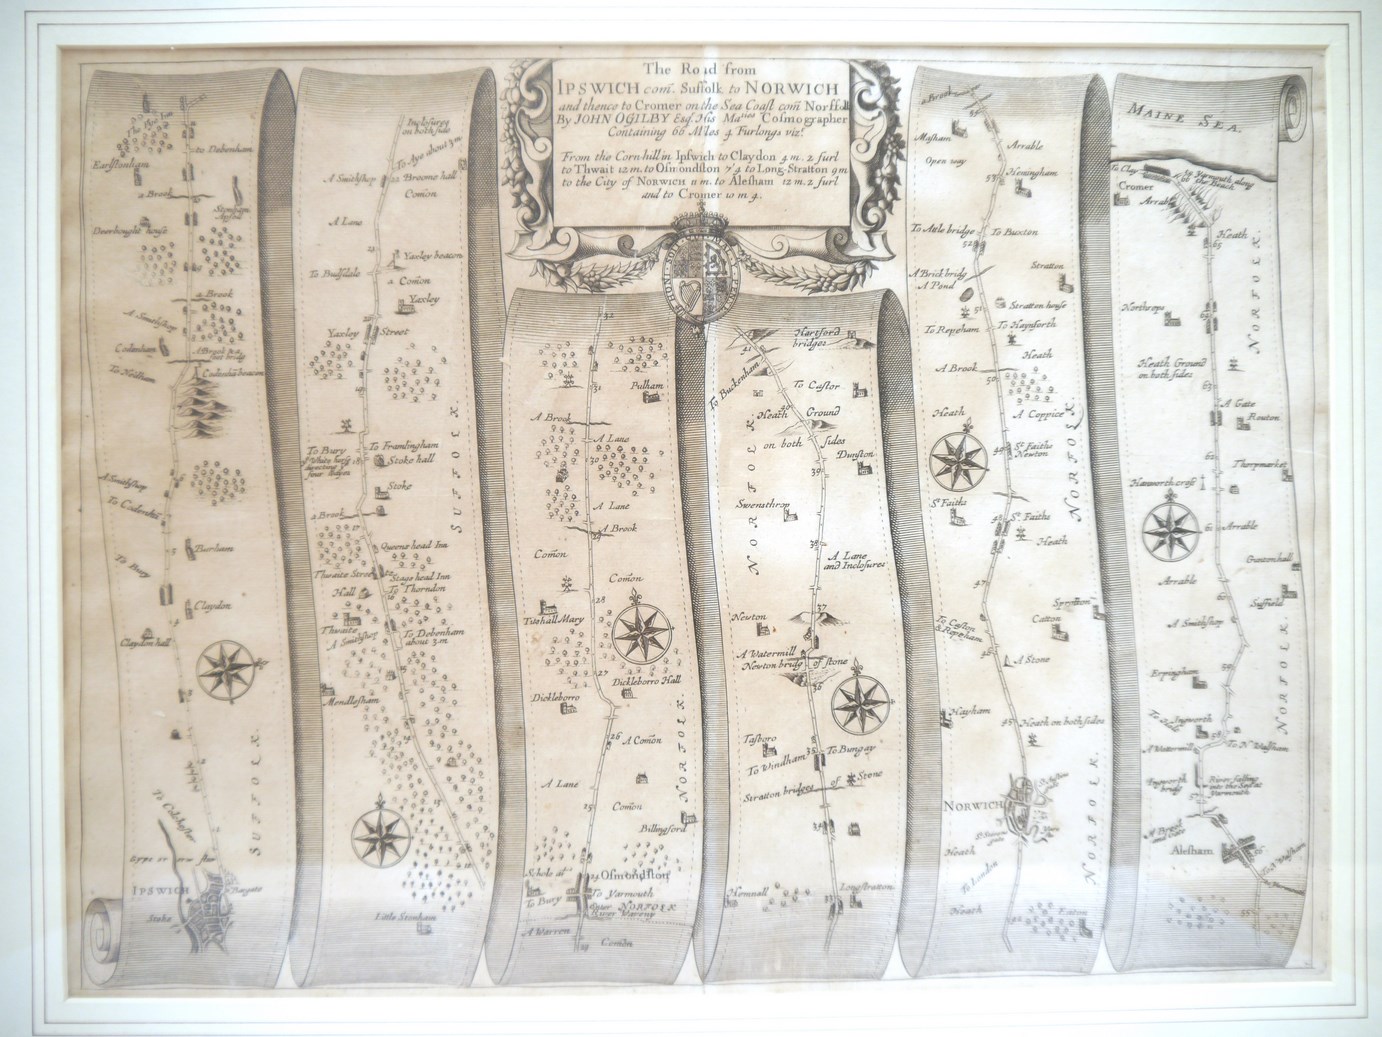 John Ogilby: 'The Road from Ipswich…to Norwich', road strip map circa 1675,